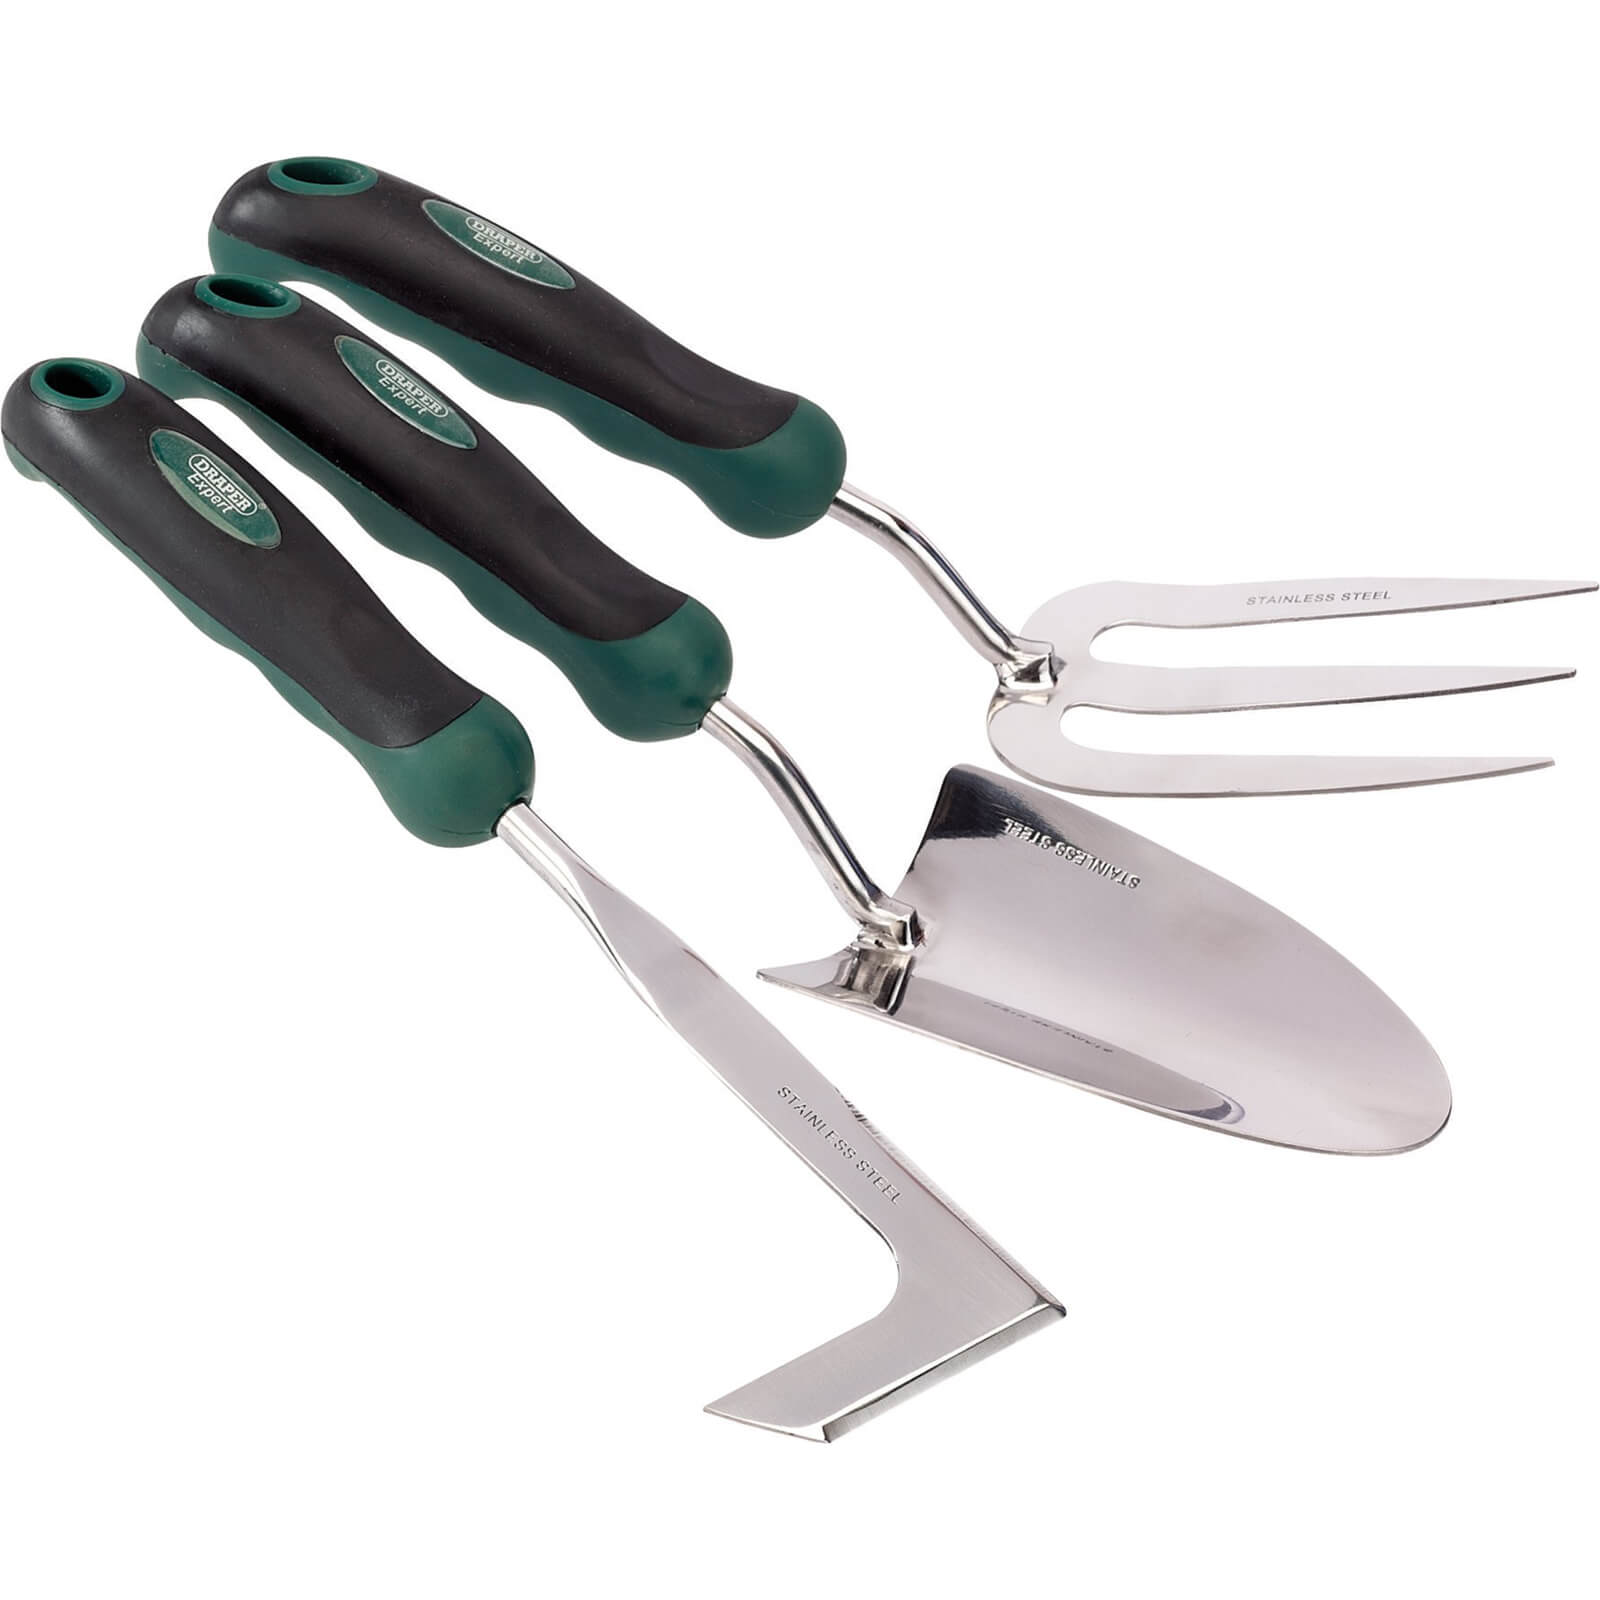 Image of Draper Expert Heavy Duty Stainless Steel Hand Fork, Trowel and Weed Fork Set